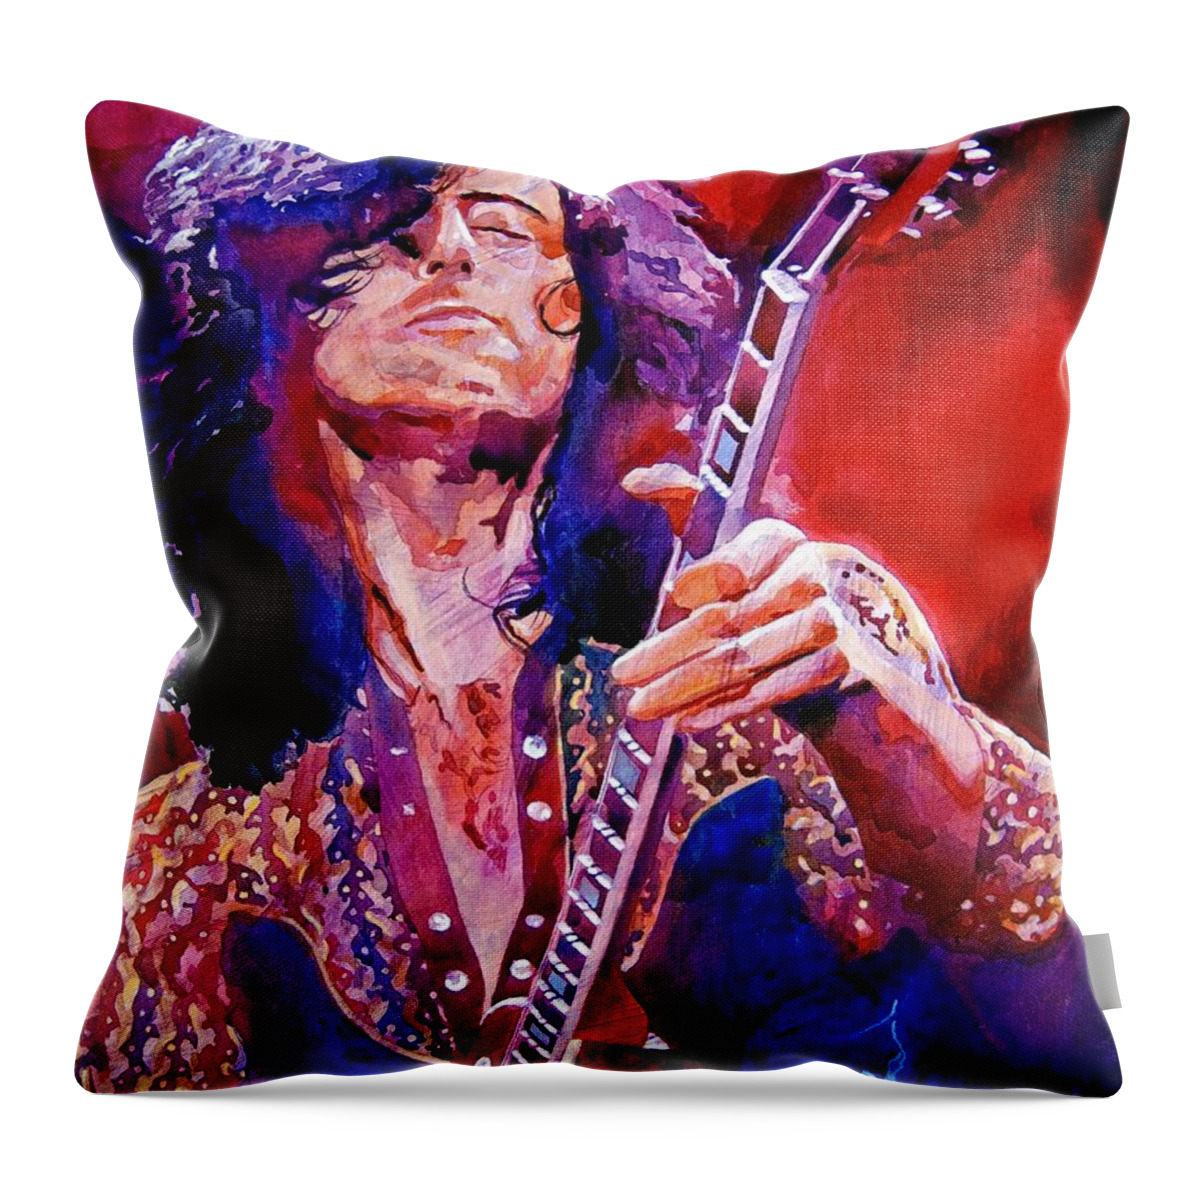 Jimmy Page Throw Pillow featuring the painting Jimmy Page by David Lloyd Glover